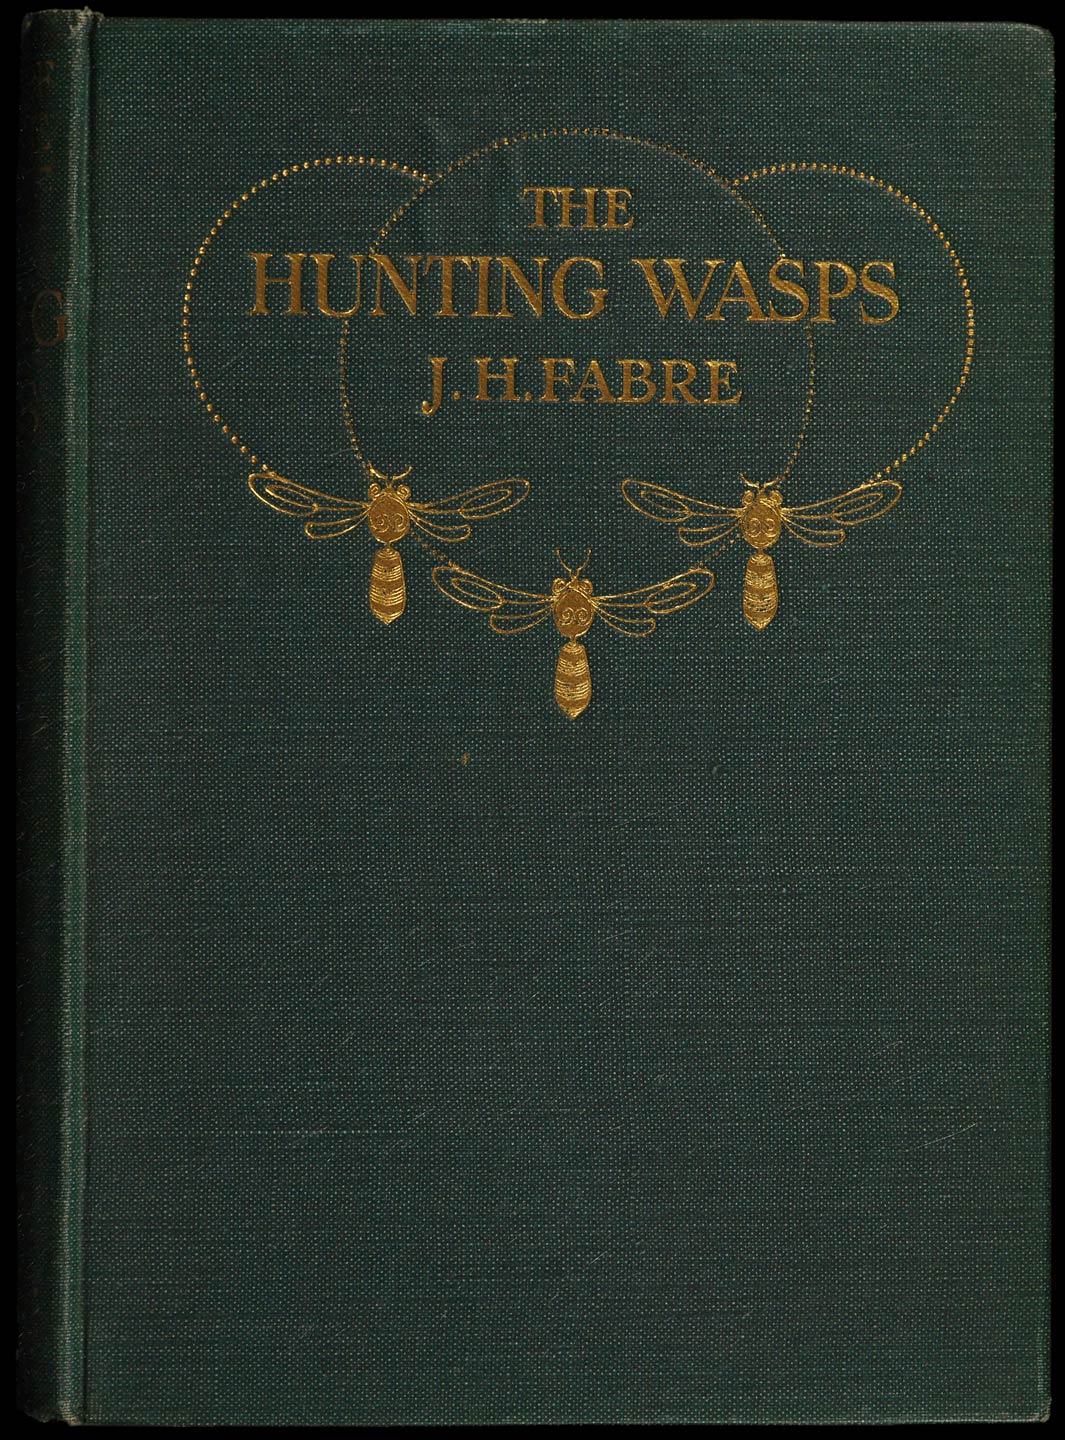 The hunting wasps